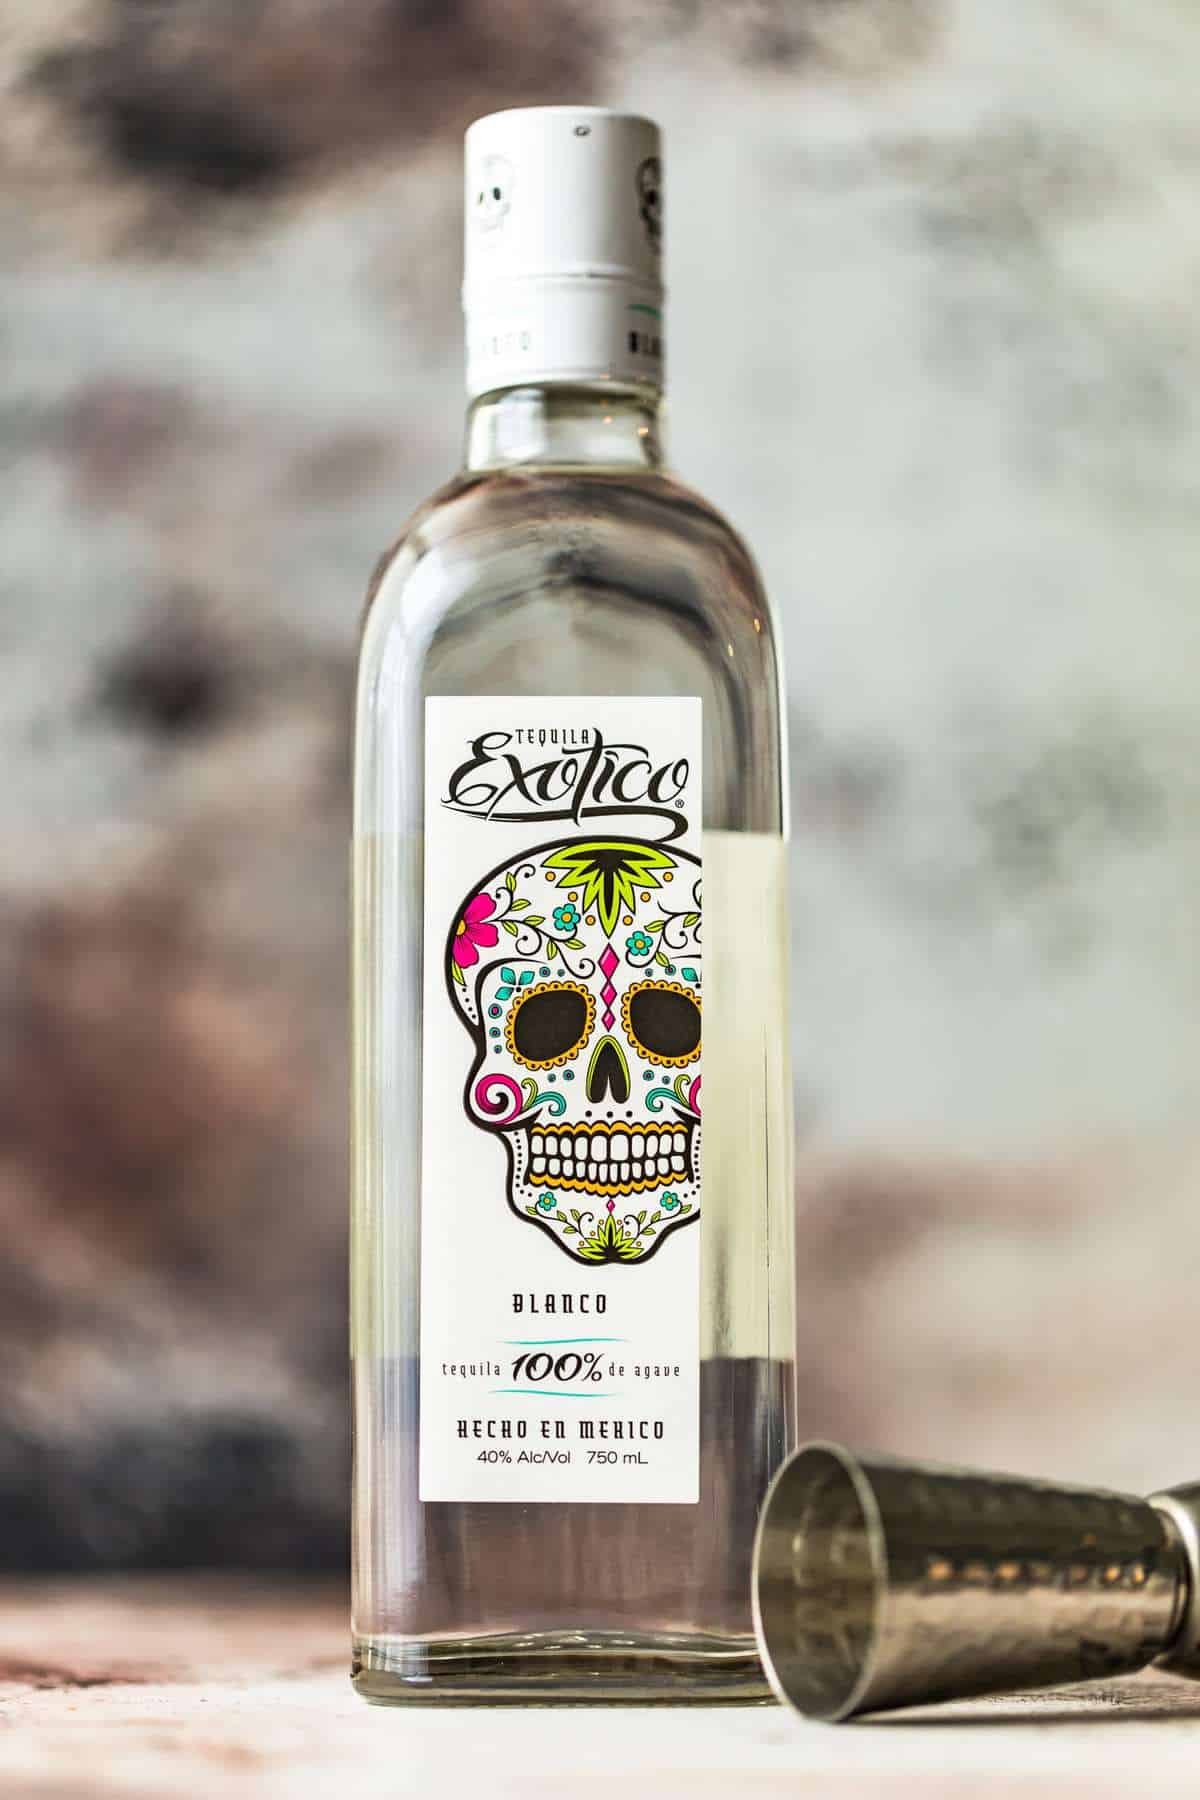 Exotico Tequila bottle on a table